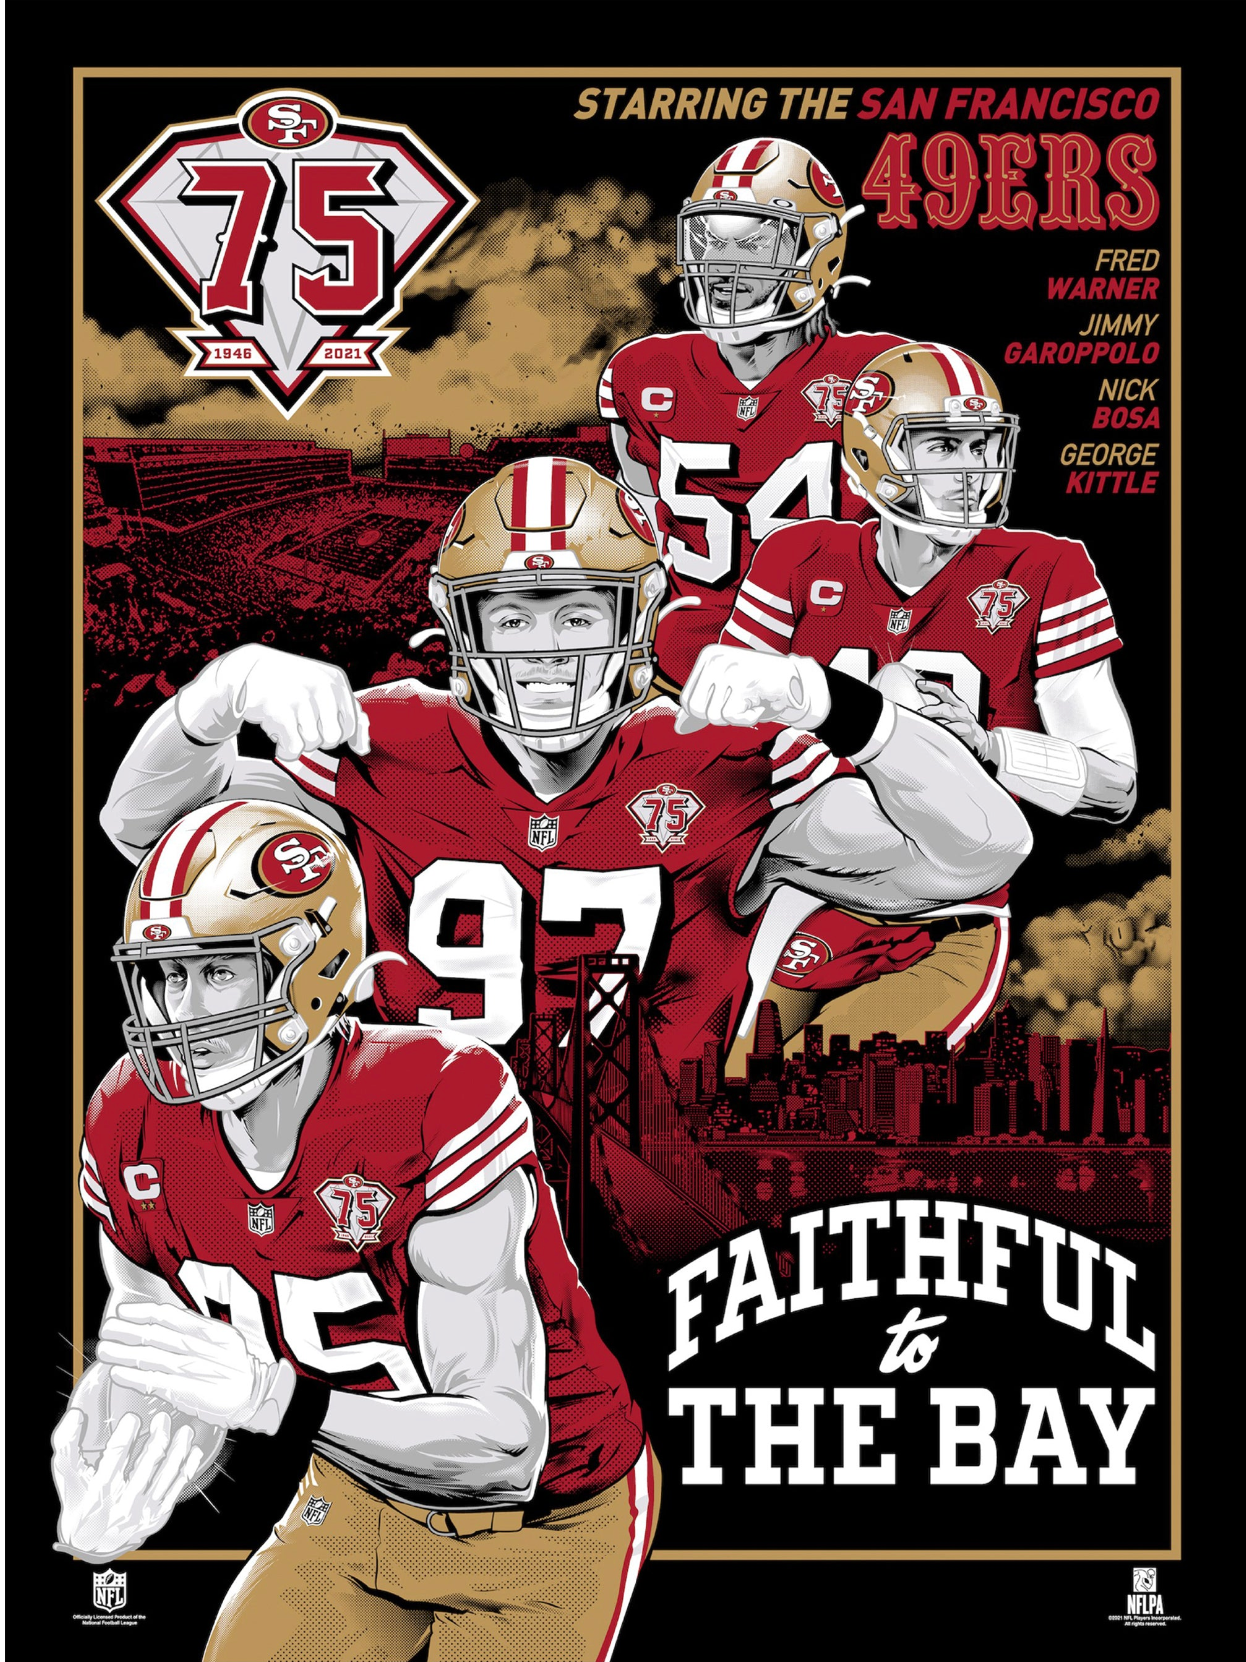 49ers jersey 75th anniversary